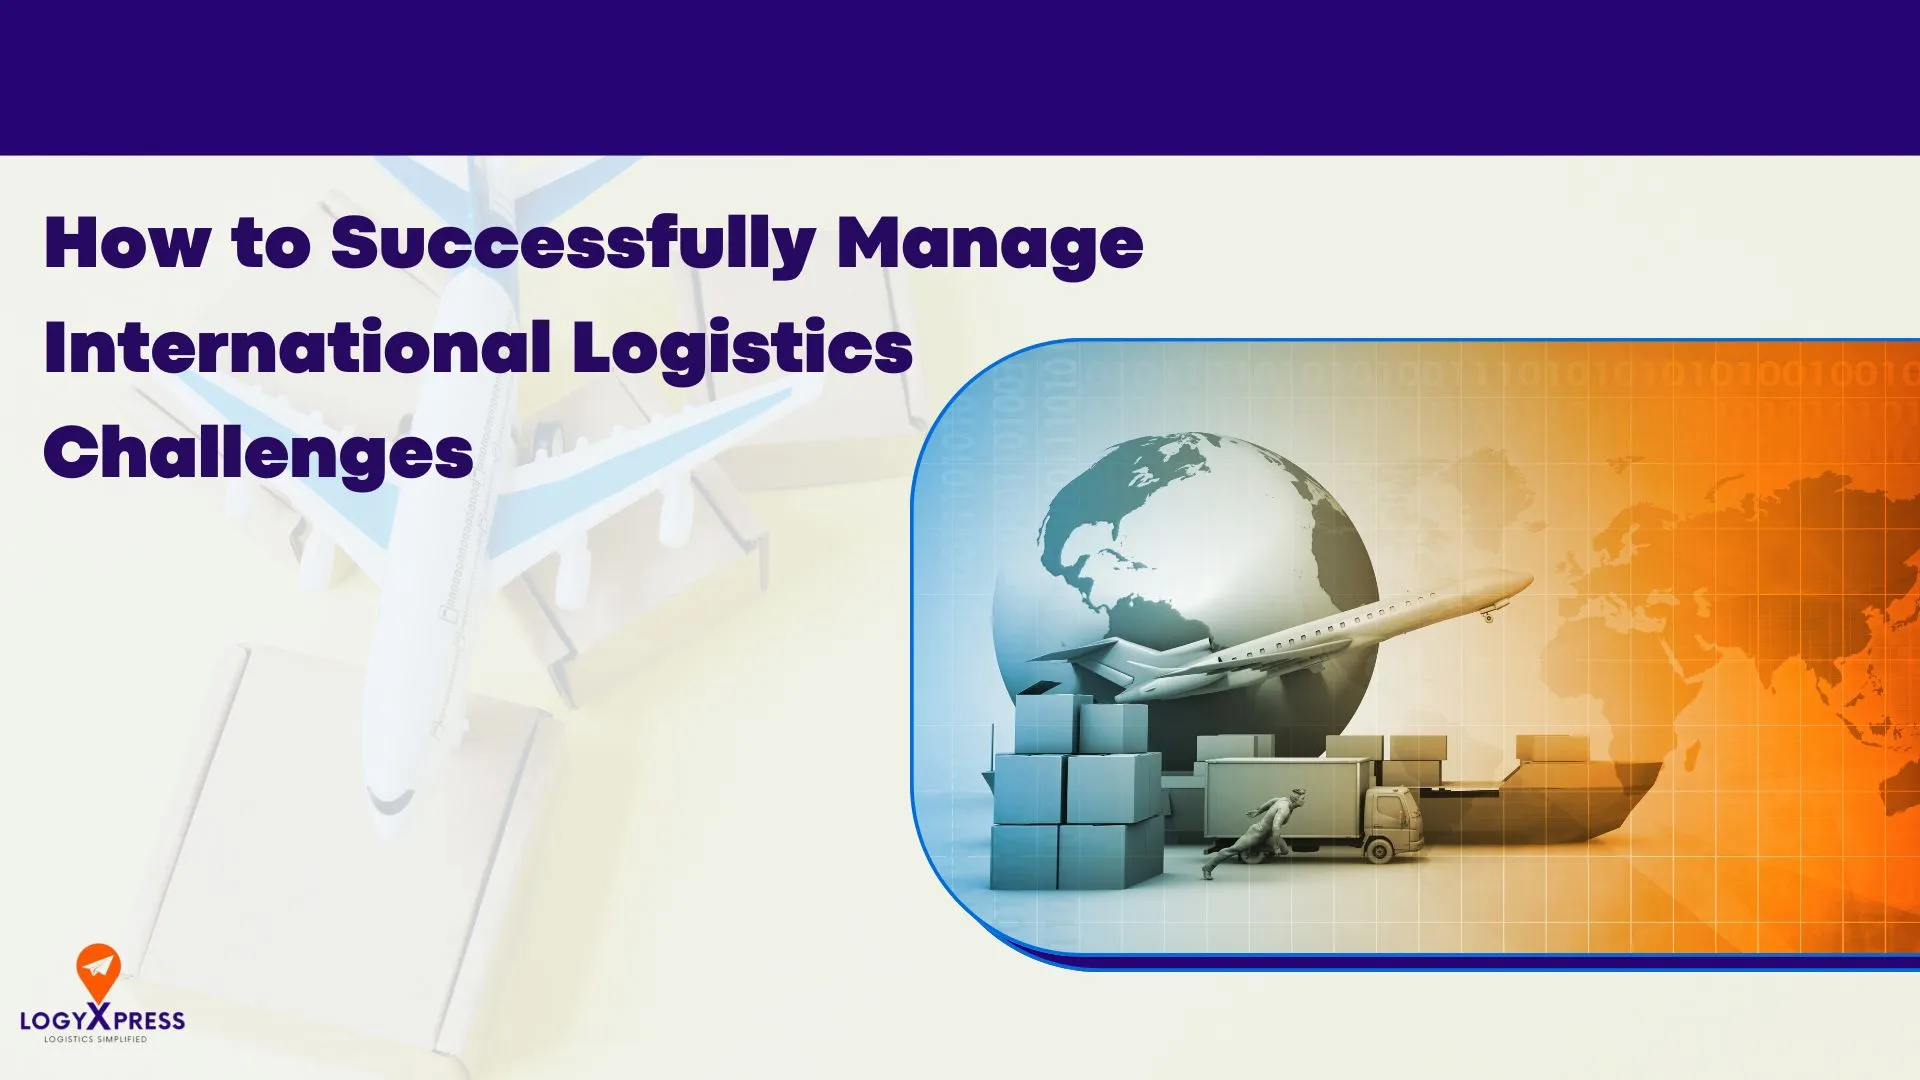 How to Successfully Manage International Logistics Challenges